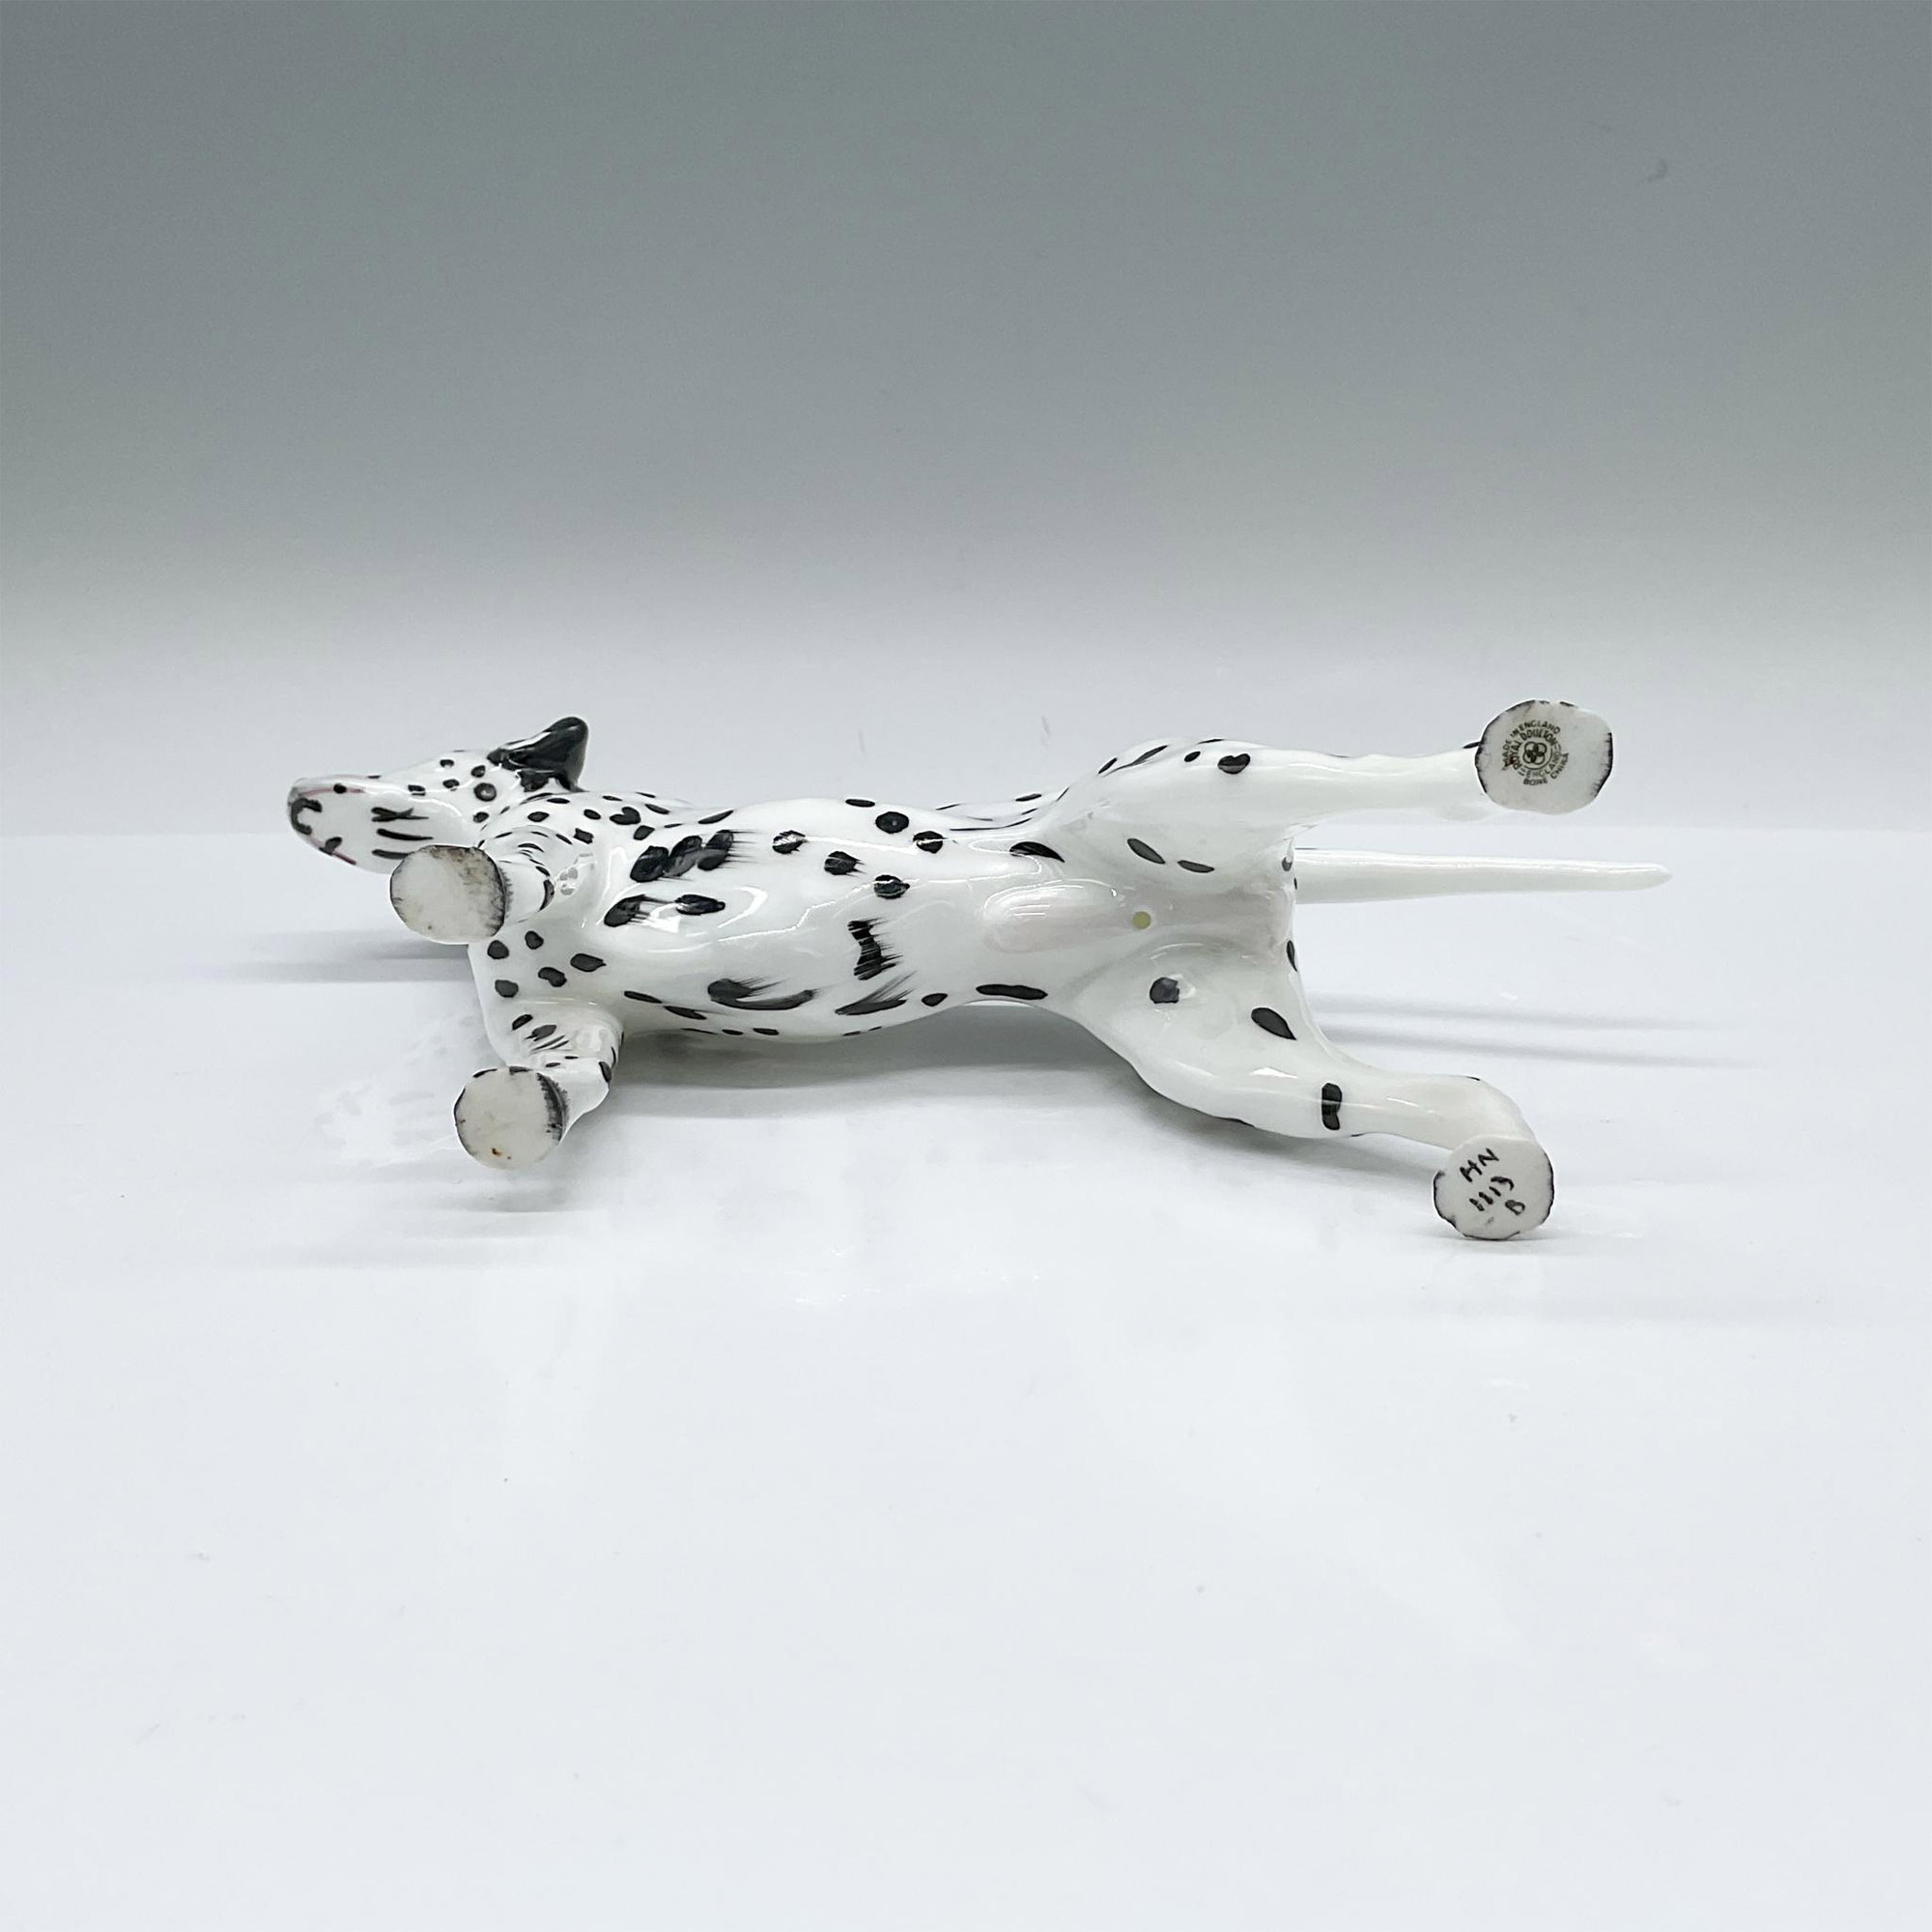 Dalmatian Ch. Goworth Victor HN1113 - Royal Doulton Animal Figurine - Image 3 of 3